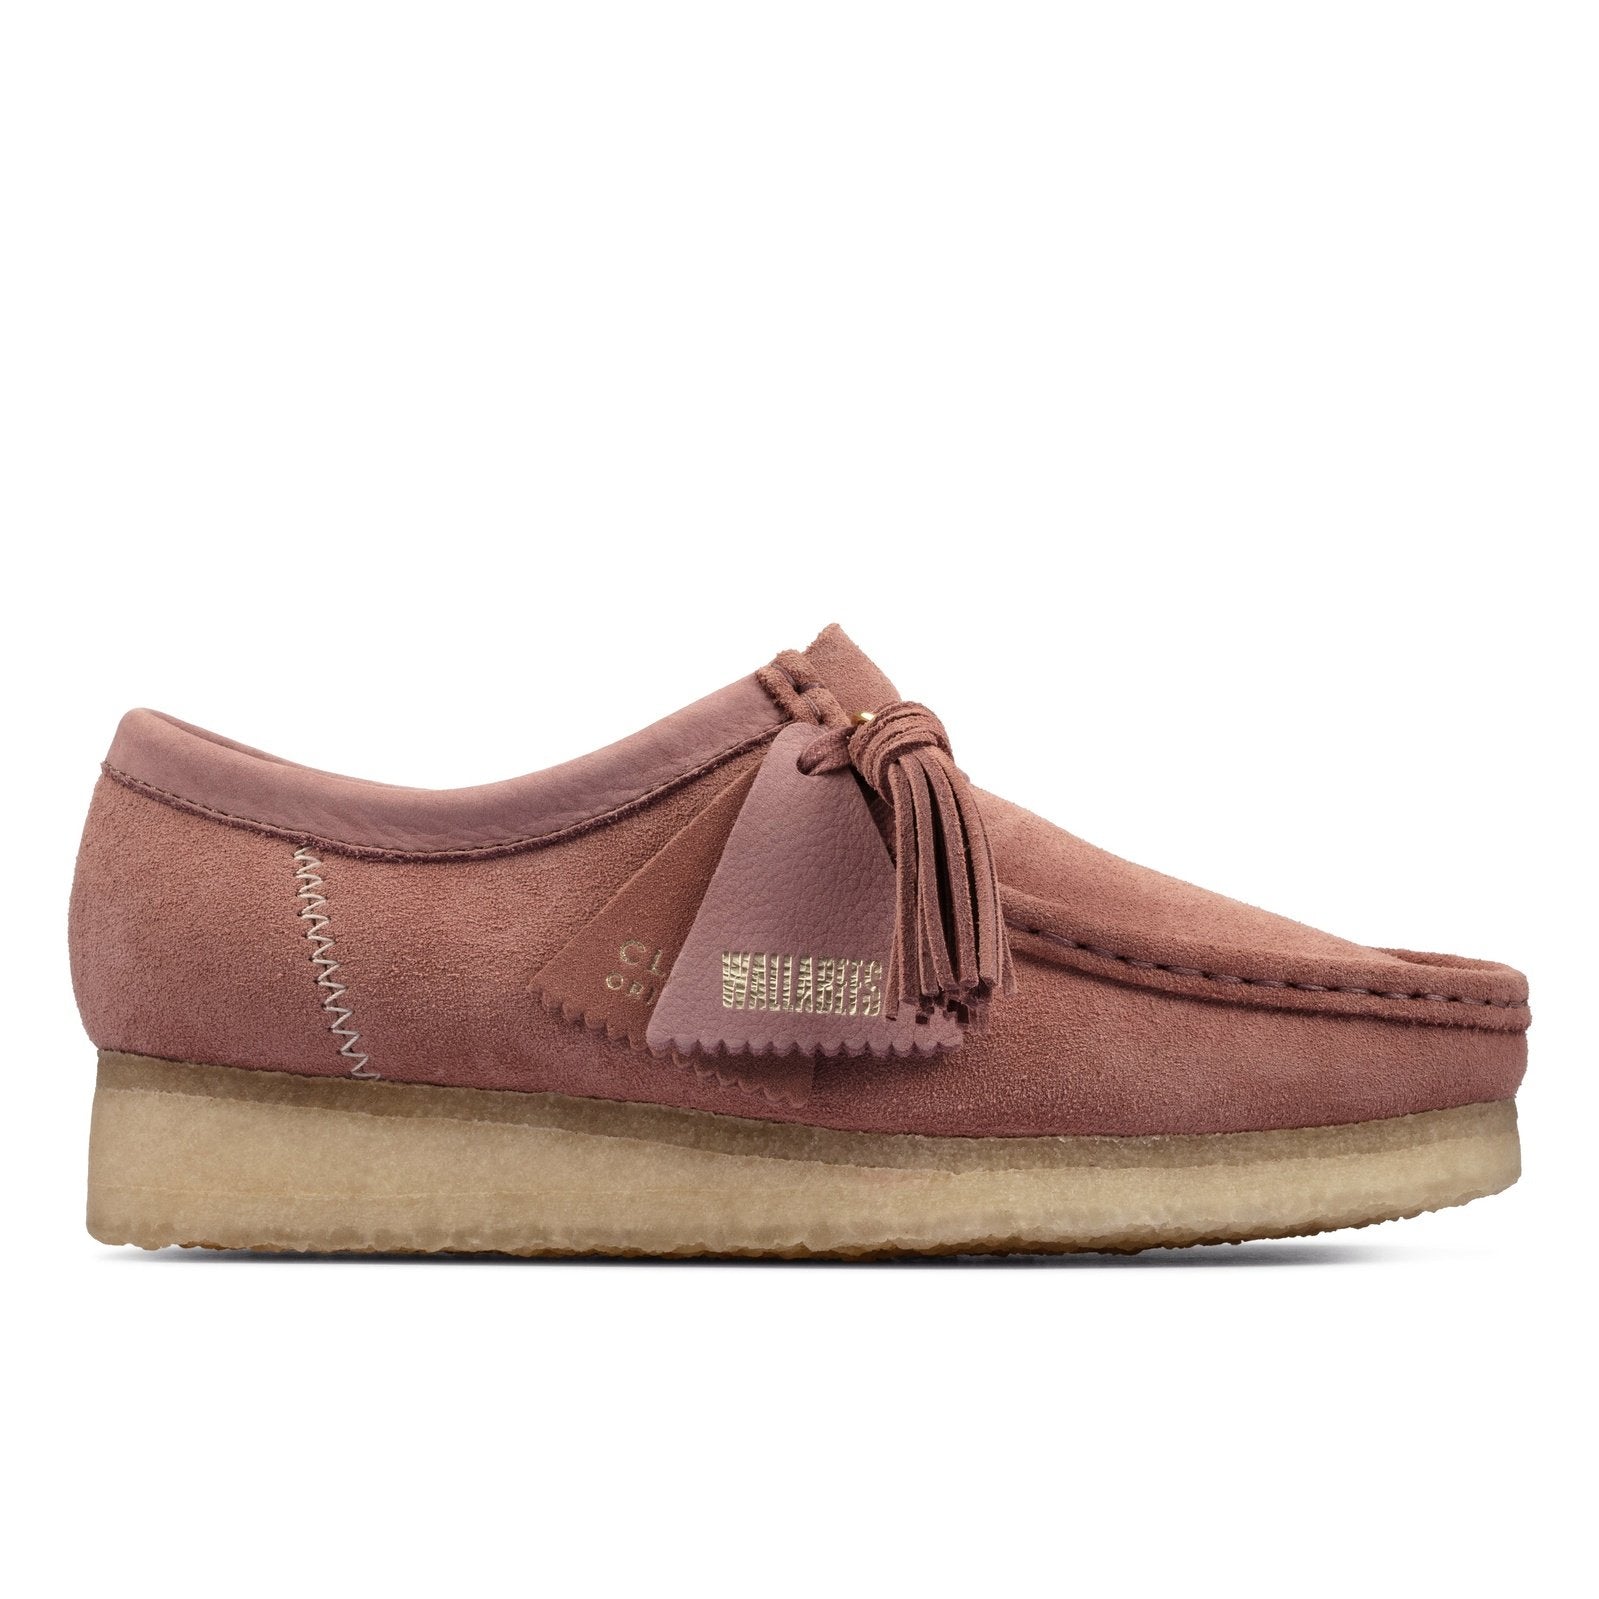 Clarks Womens Shoes Dusty Pink Suede – THE CLARKS STORE